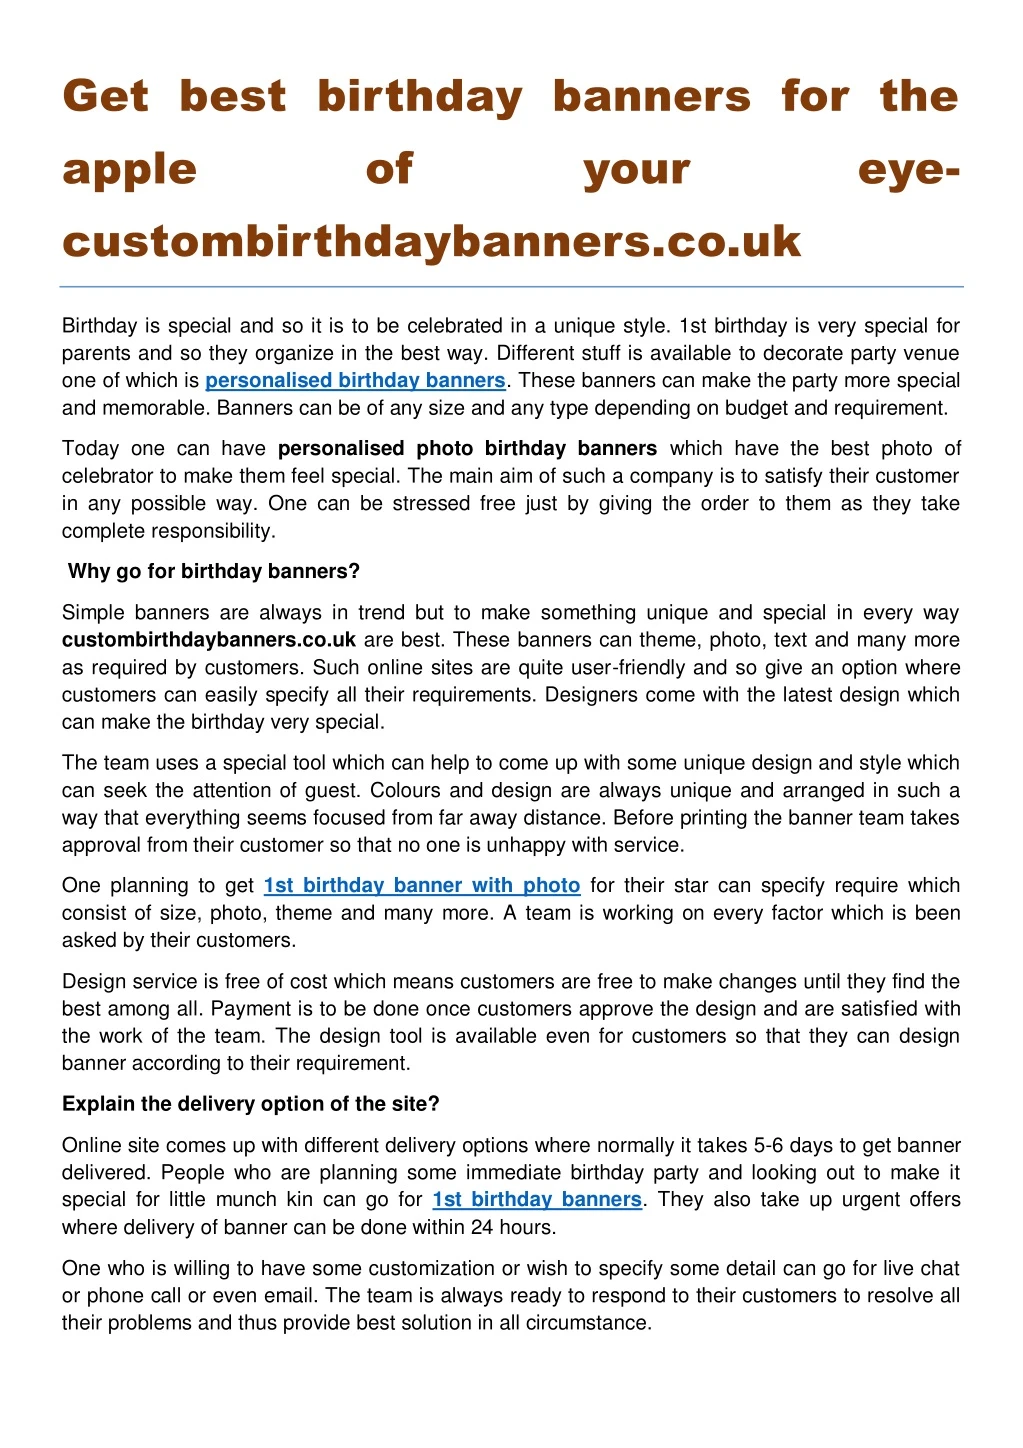 get best birthday banners for the apple